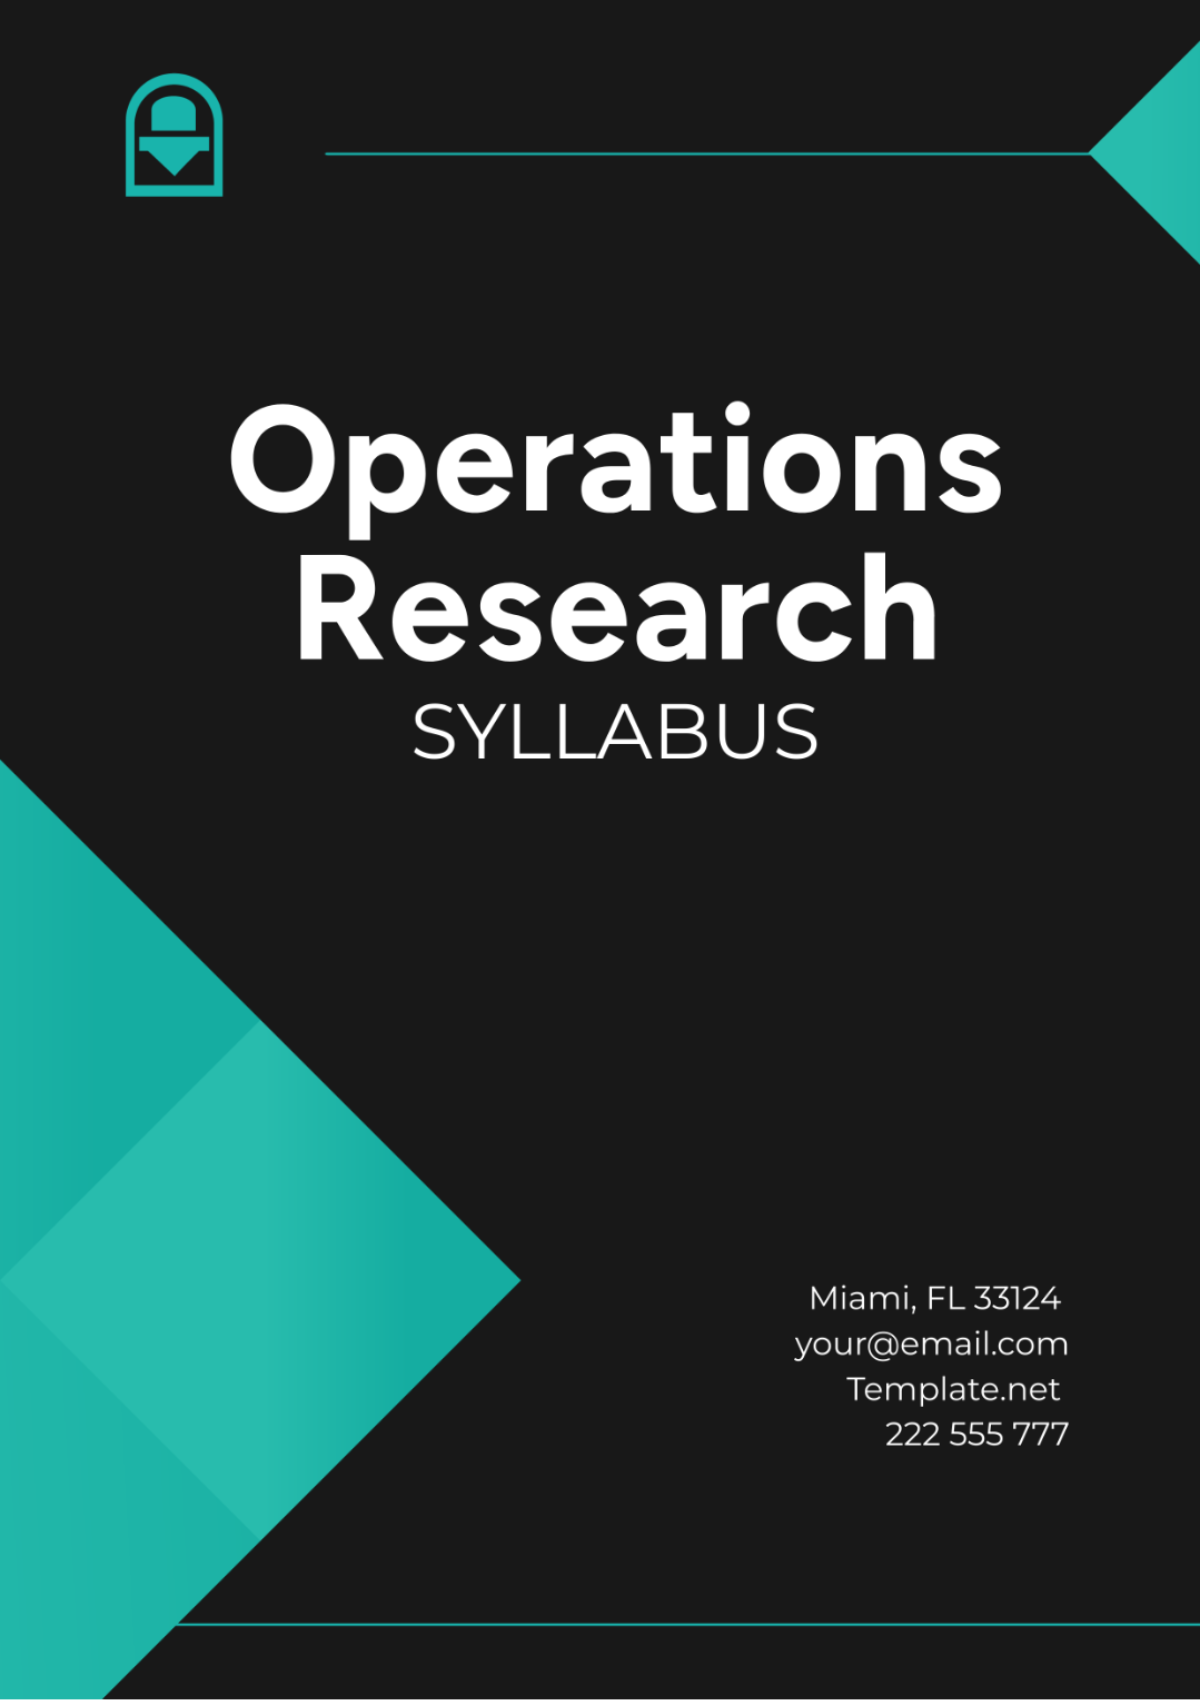 Operations Research Syllabus Template